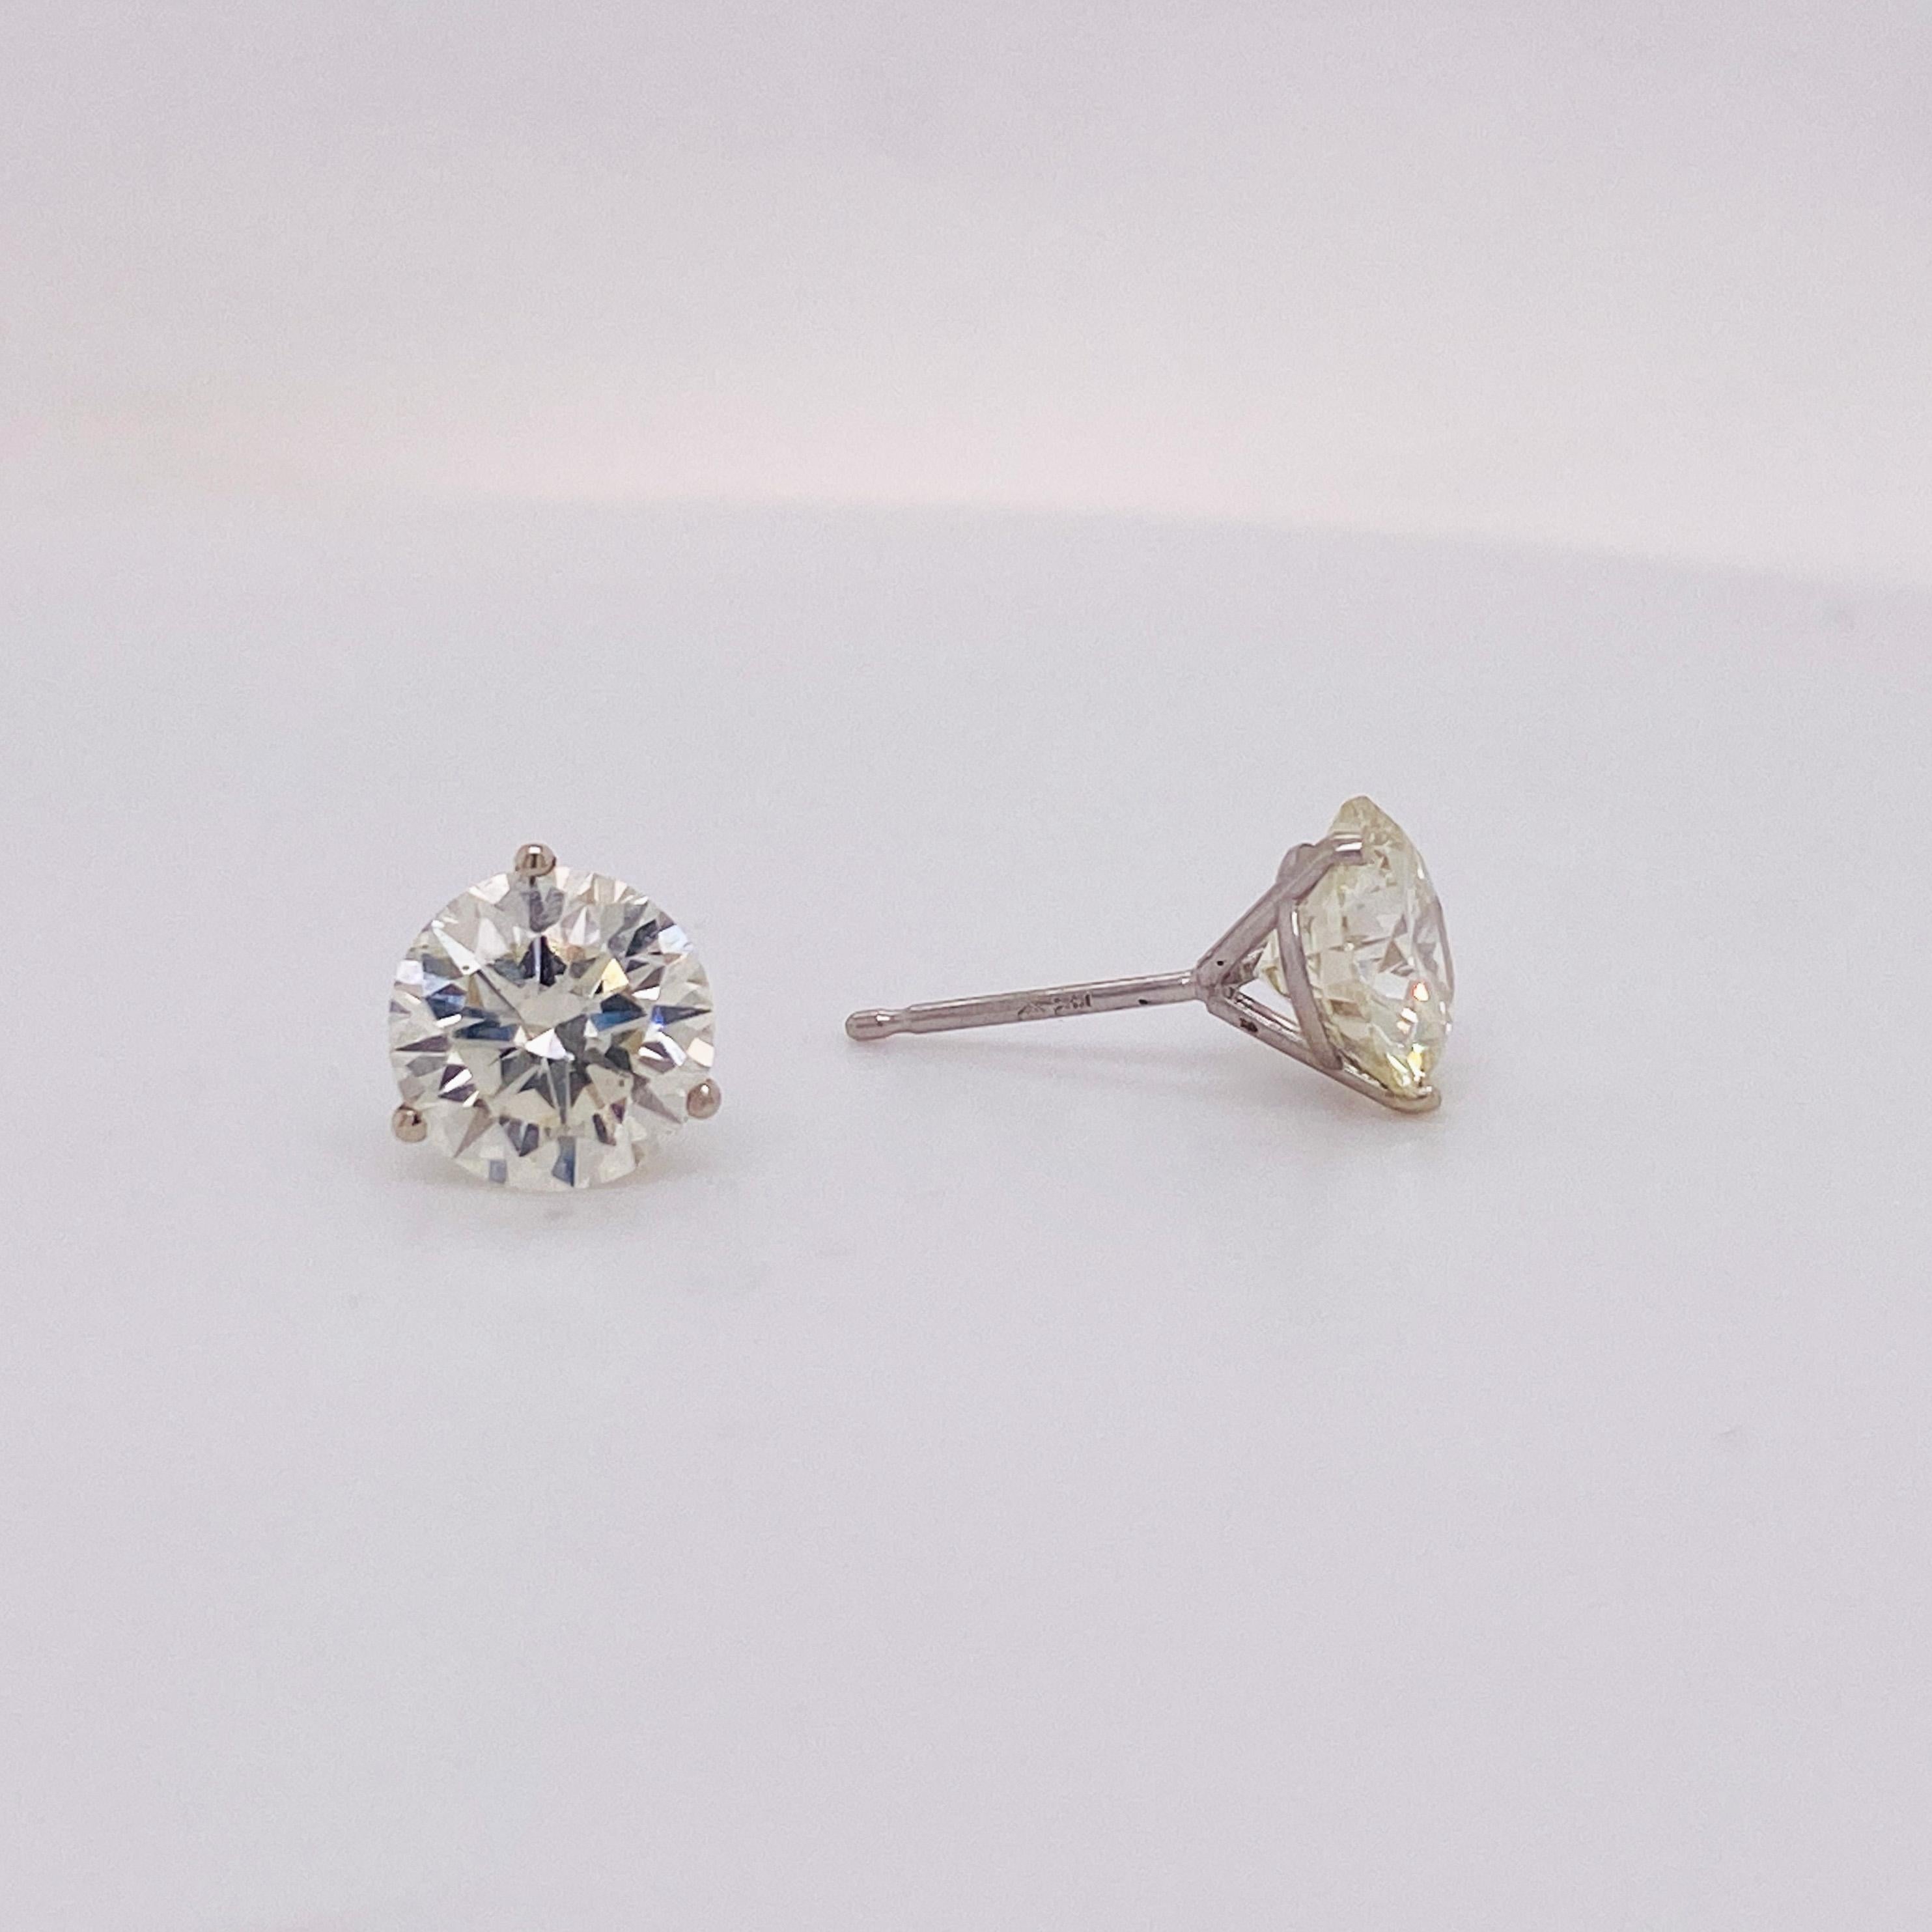 Modern 3.12 Carats Diamond Pair Martini Stud Earrings in 14K Gold Lv For Sale